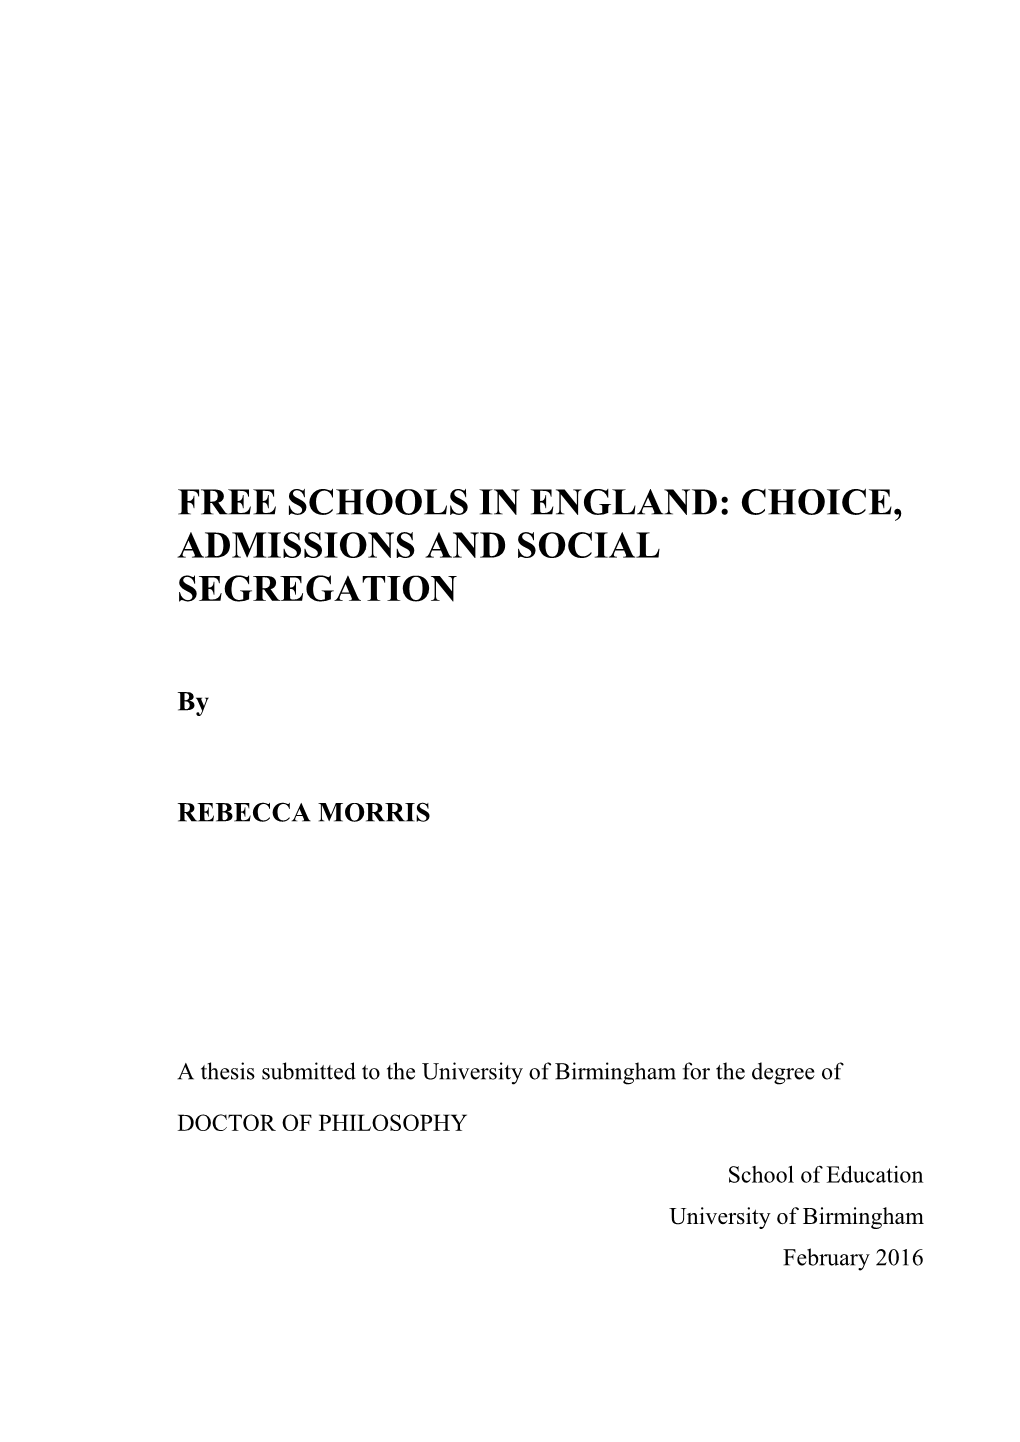 Free Schools in England: Choice, Admissions and Social Segregation